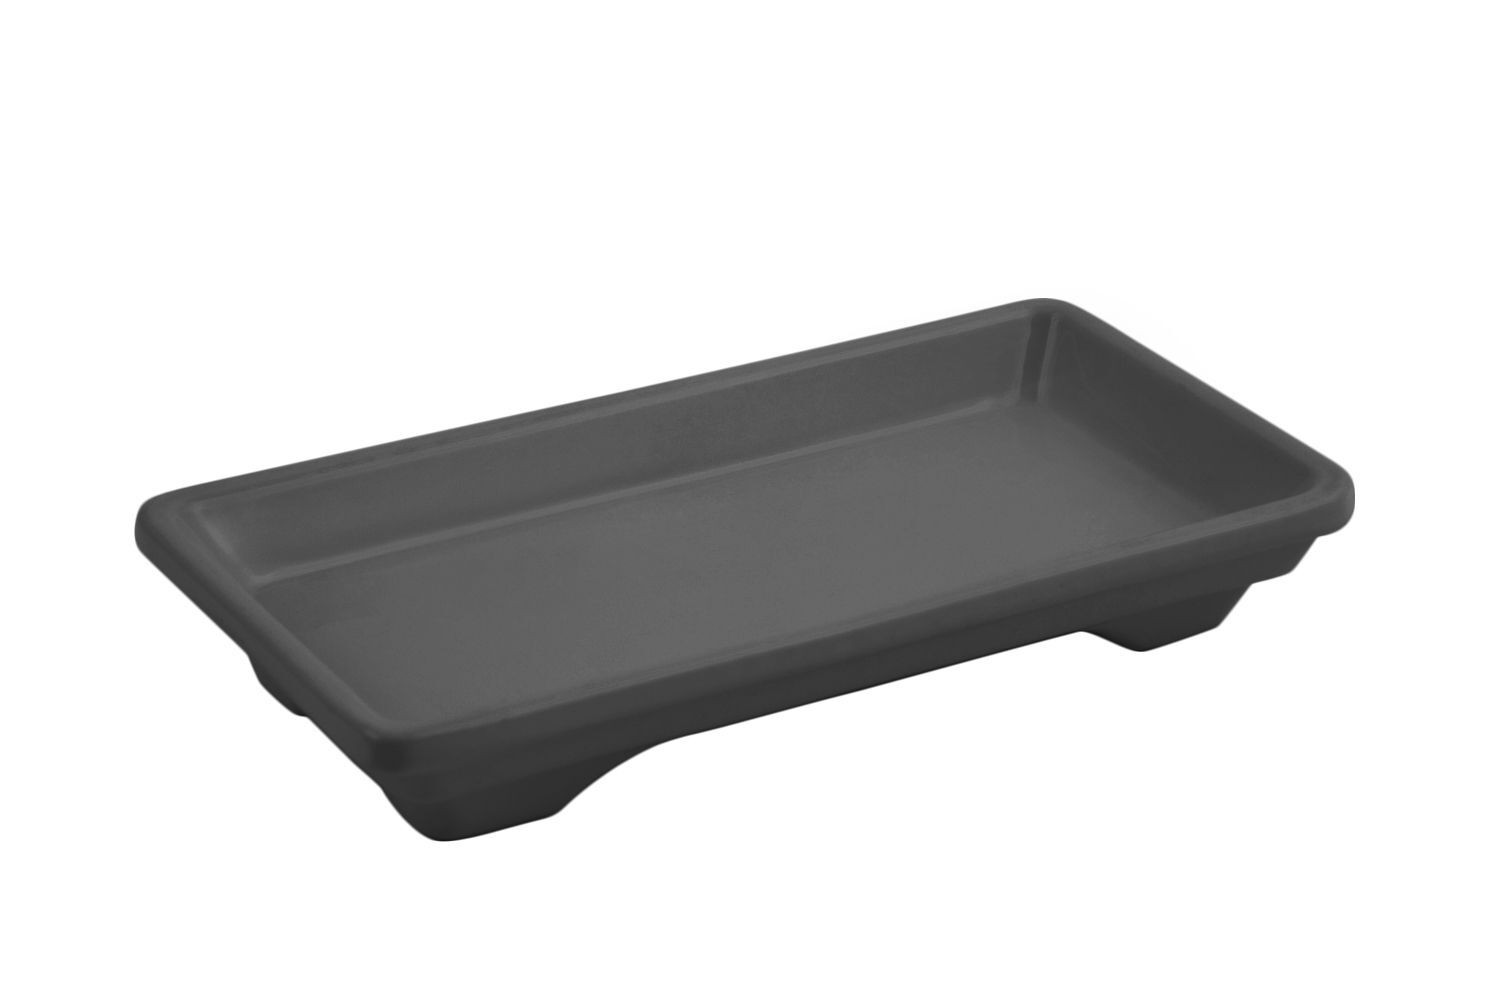 Bon Chef 9082S Small Footed Rectangular Tray, Sandstone 7 1/2" x 3 3/4", Set of 3